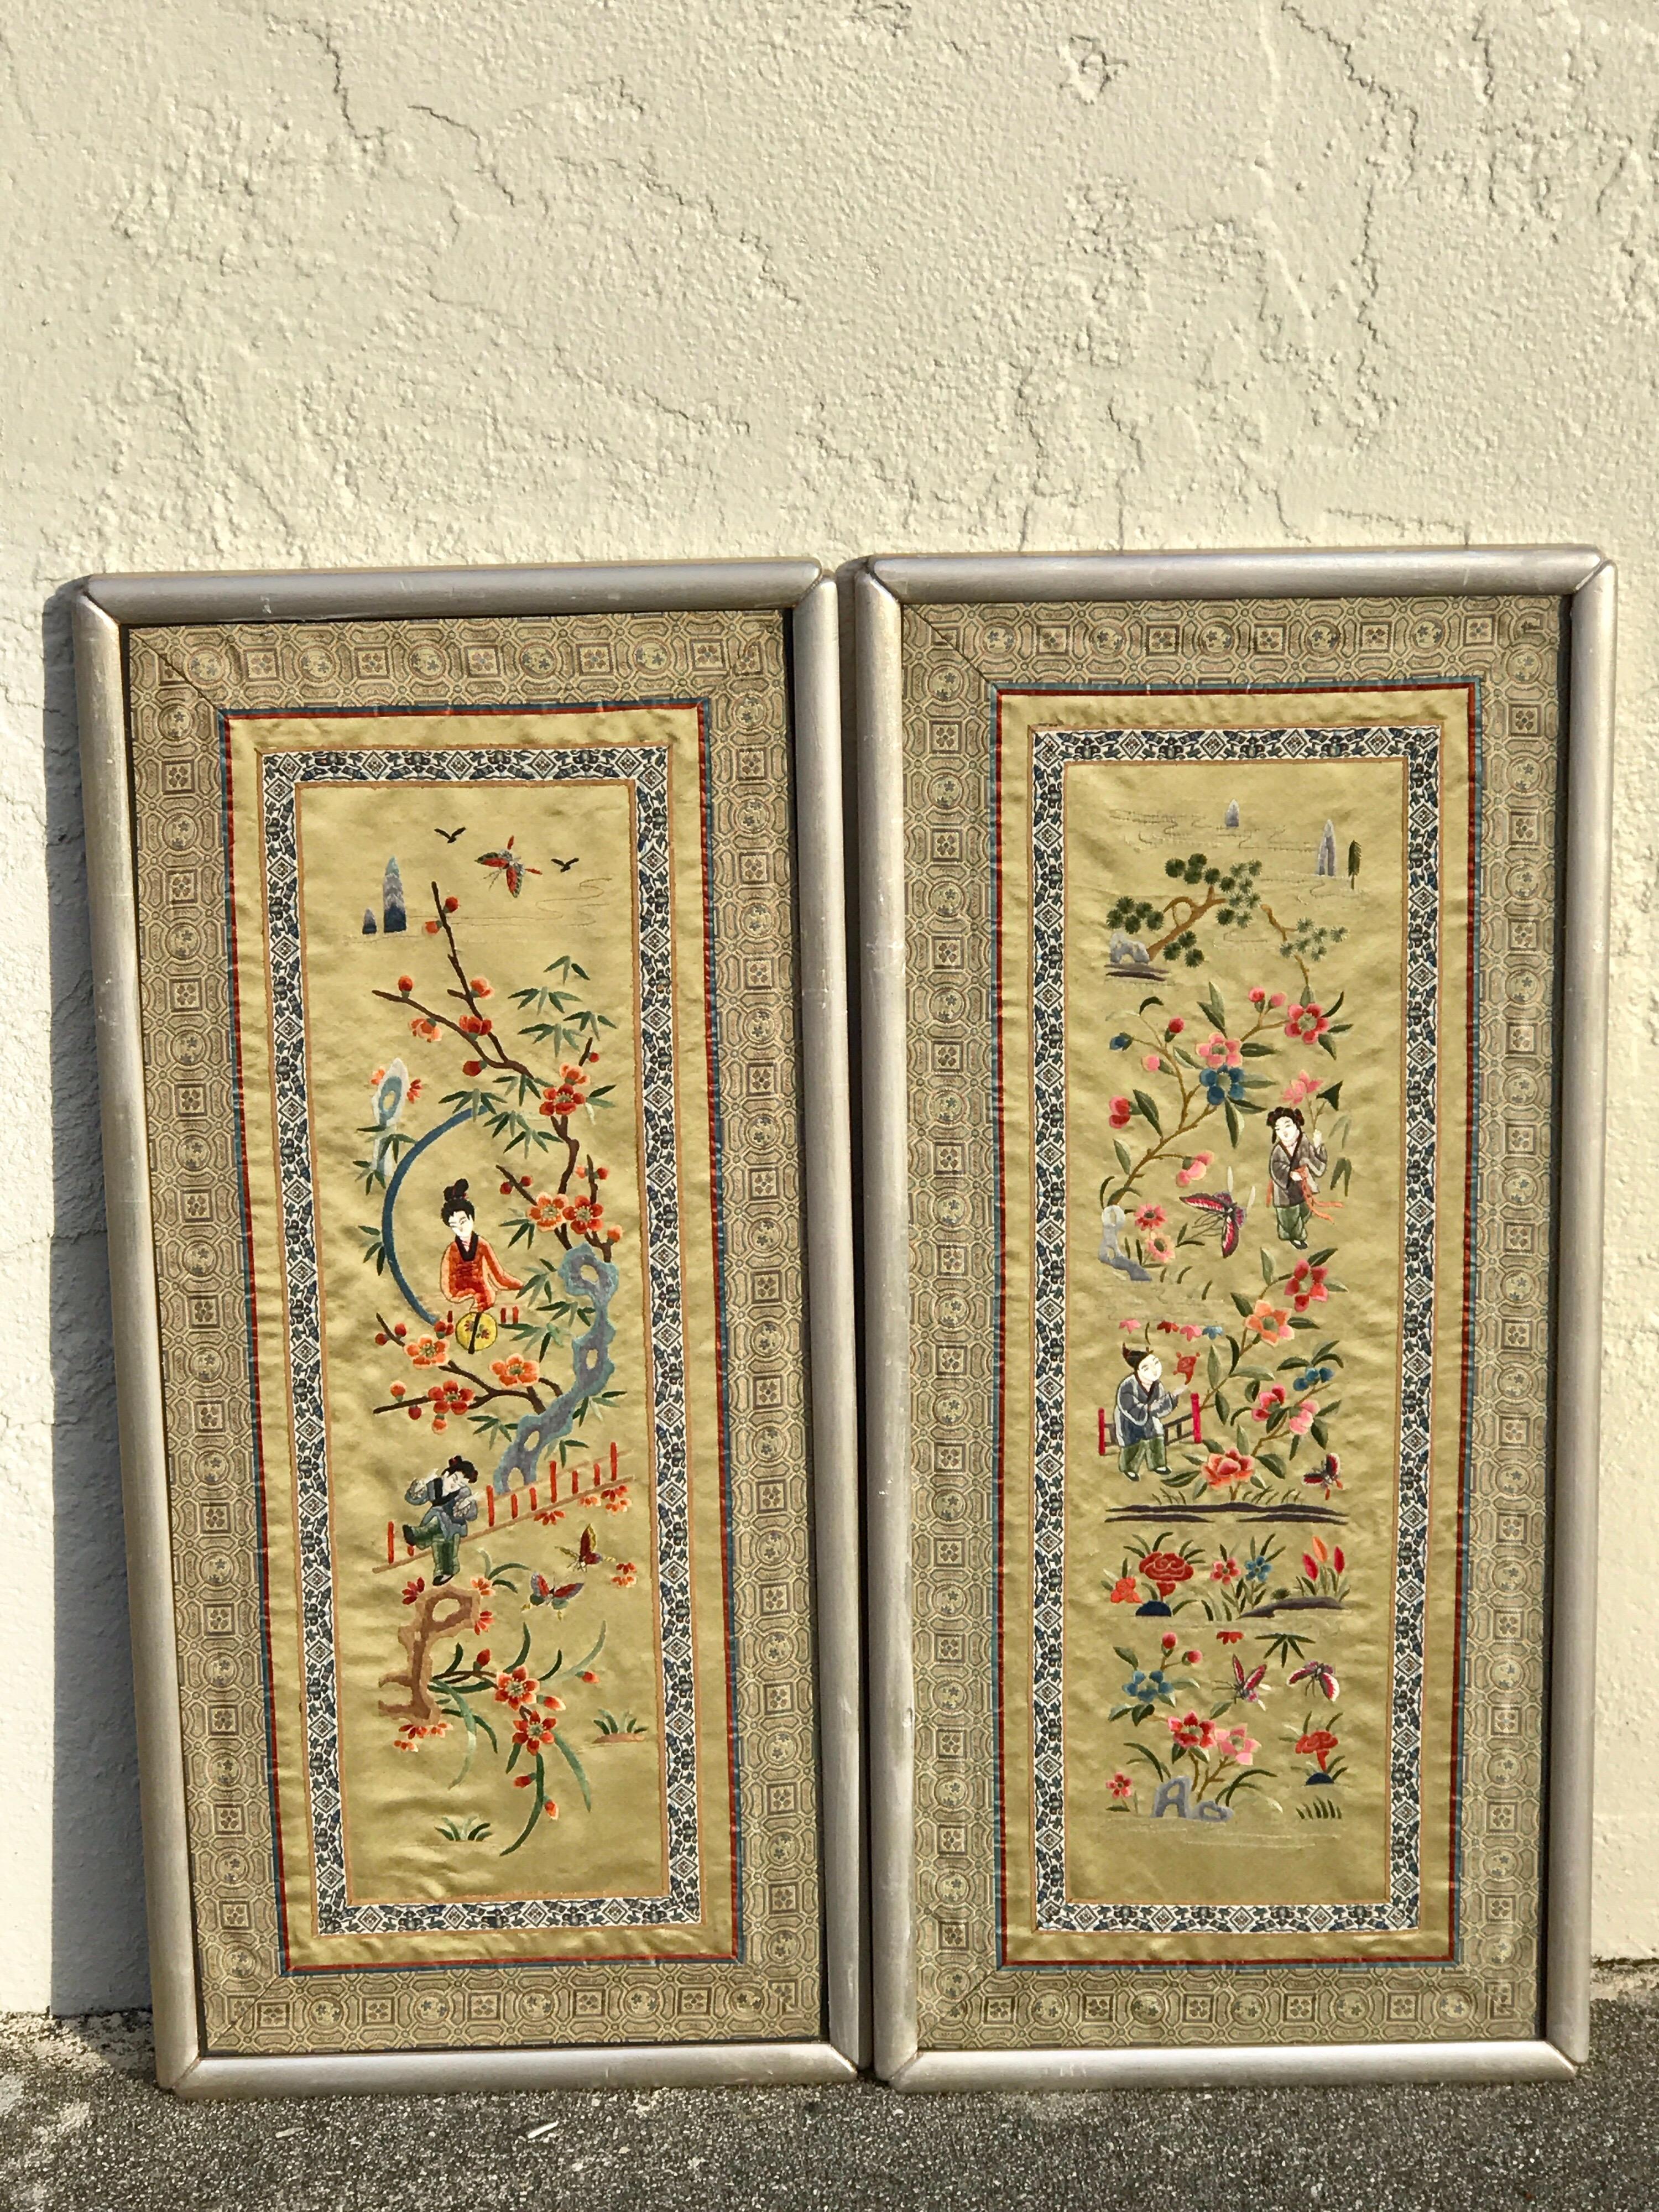 Pair of Chinese republic silk tapestries, each one intricately embroidered with Chinese garden scene, in later frames. Tapestries measure approximately 11